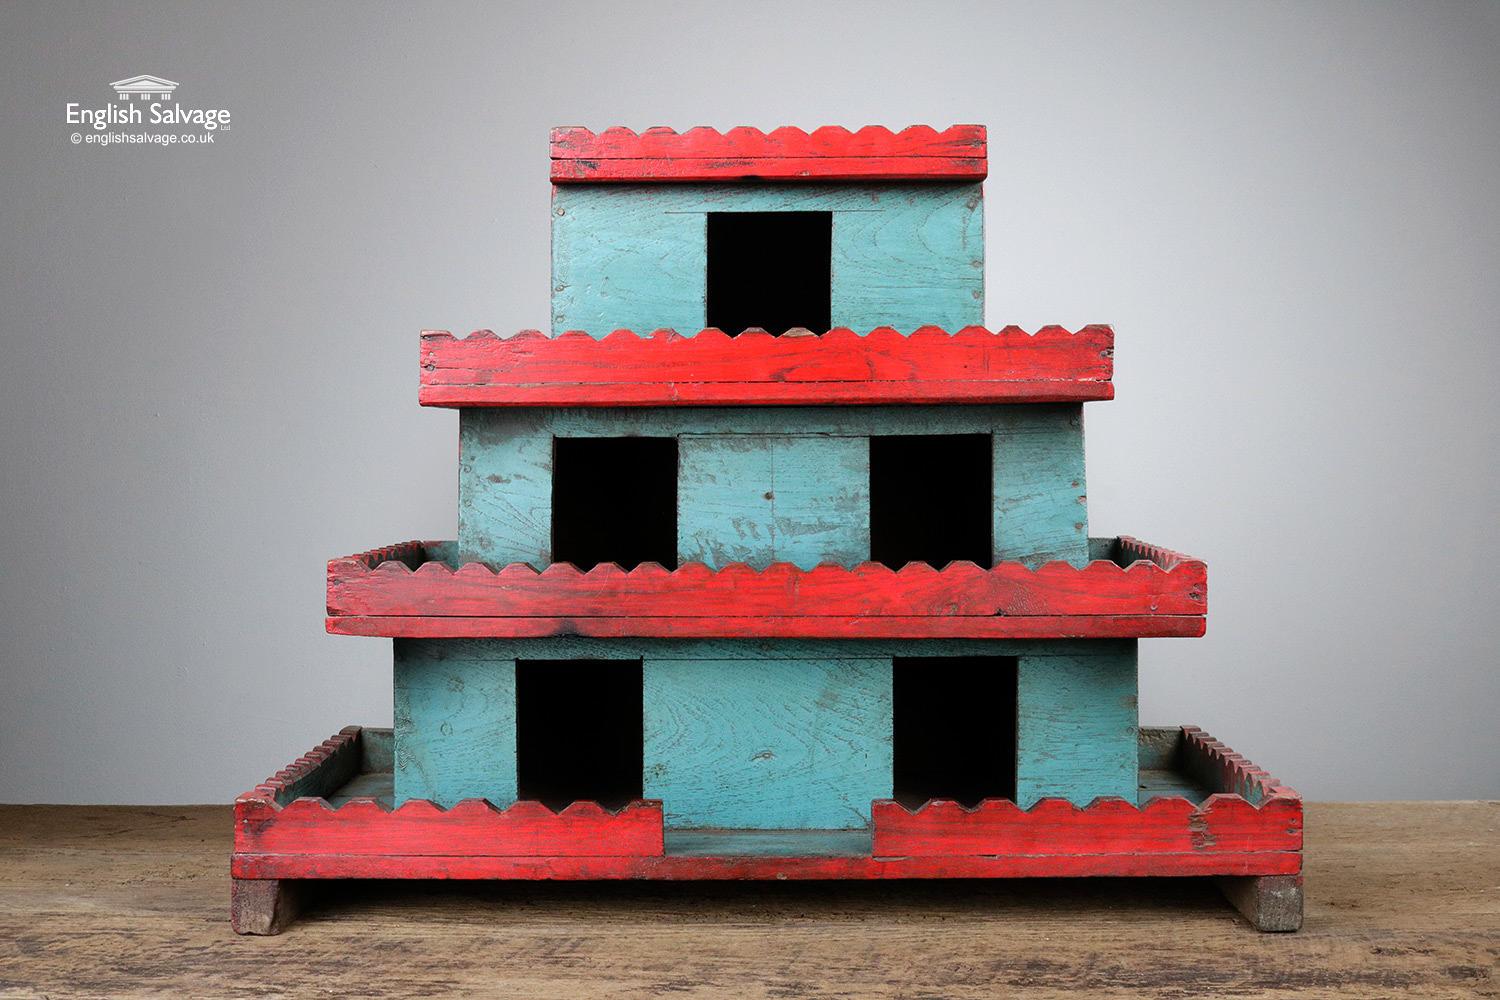 Vintage Indian hardwood model of a house painted blue with red parapet detailing. Would make a lovely unique display stand. The bottom tier is 61cm wide x 30cm deep, the middle tier is 51cm wide x 27.5cm deep and the top tier is 26.2cm wide x 22cm